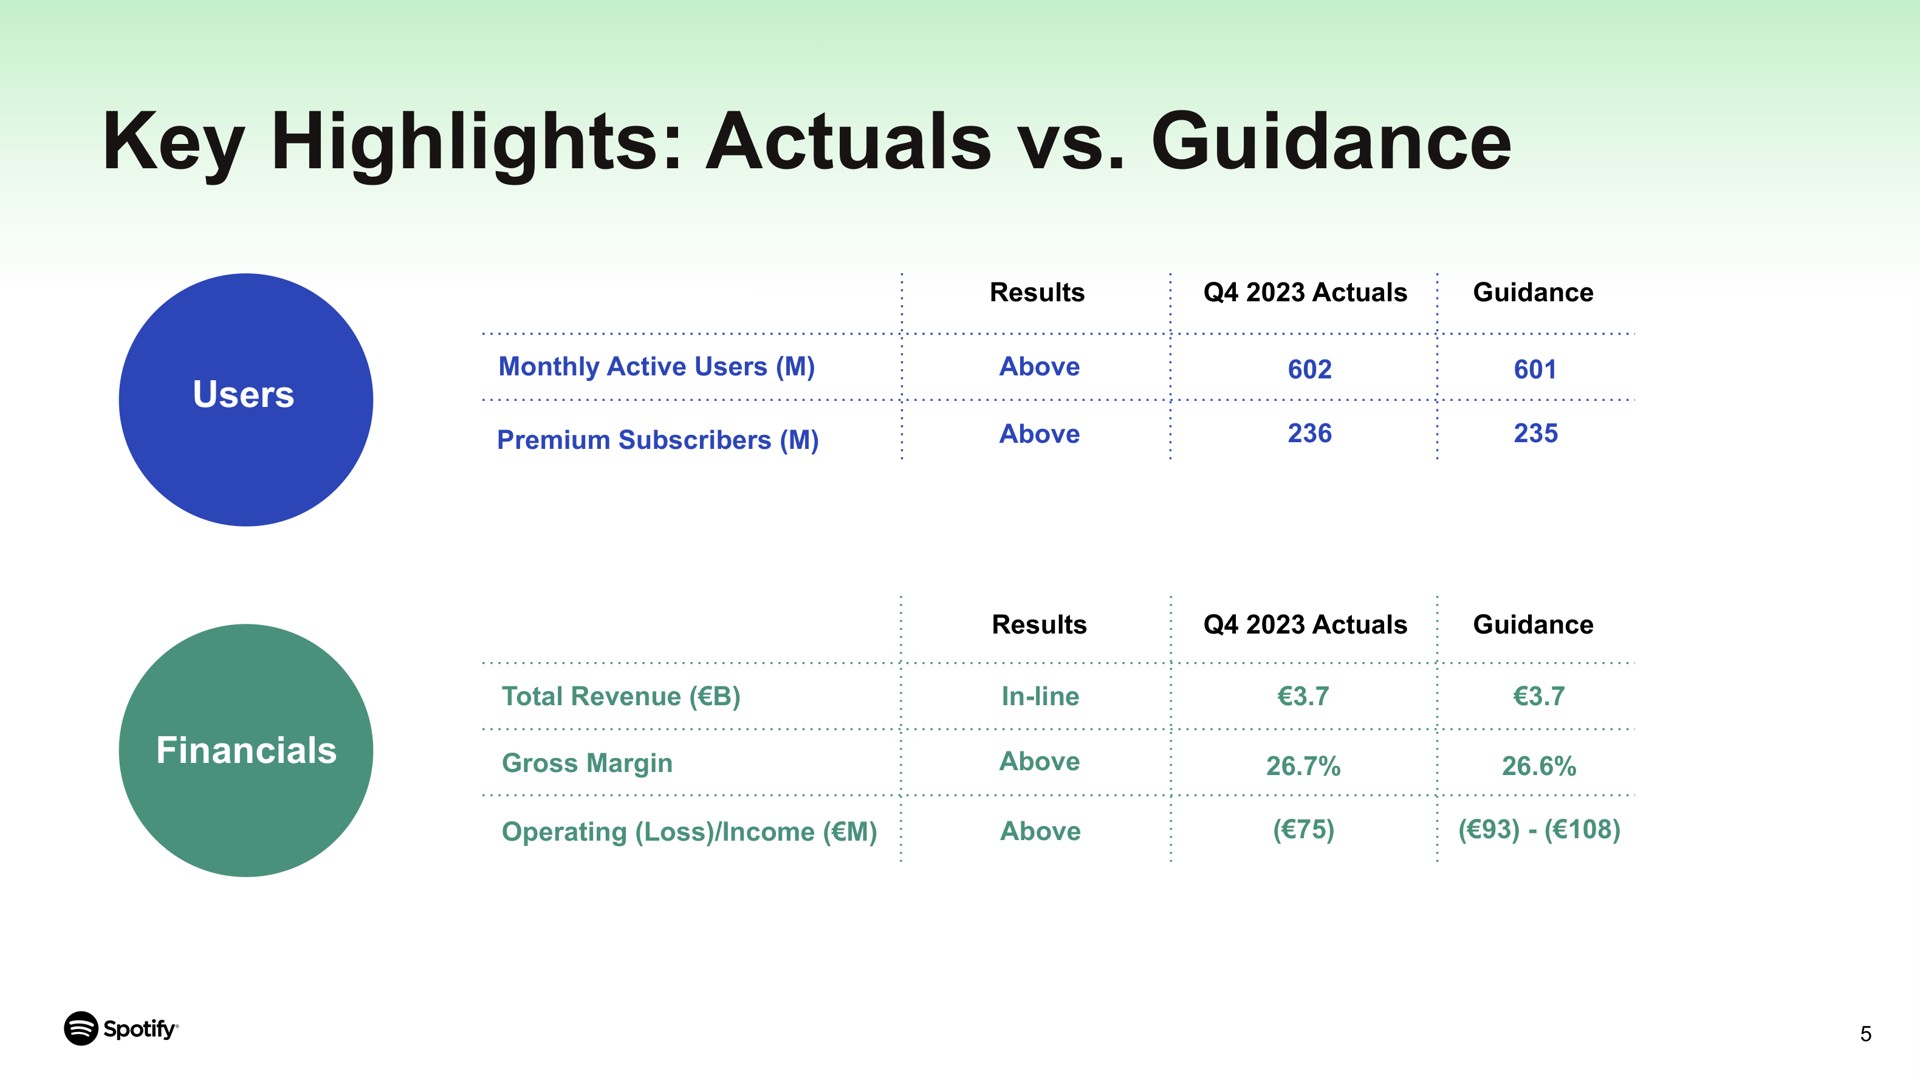 key highlights guidance users monthly active i results ras i above results nae ocean a a a a a | Spotify